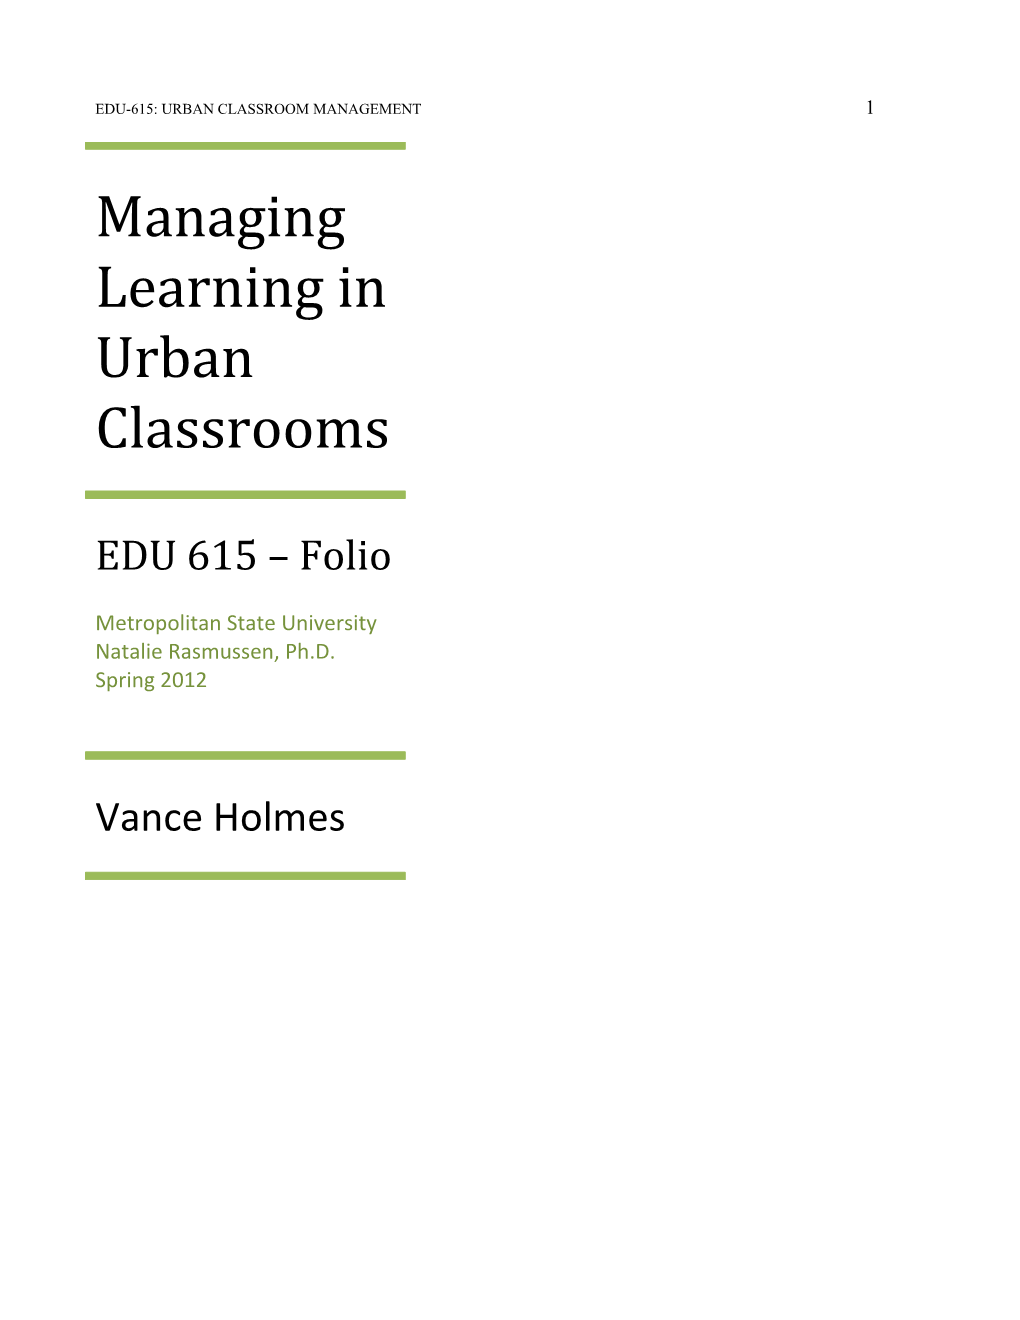 Managing Learning in Urban Classrooms